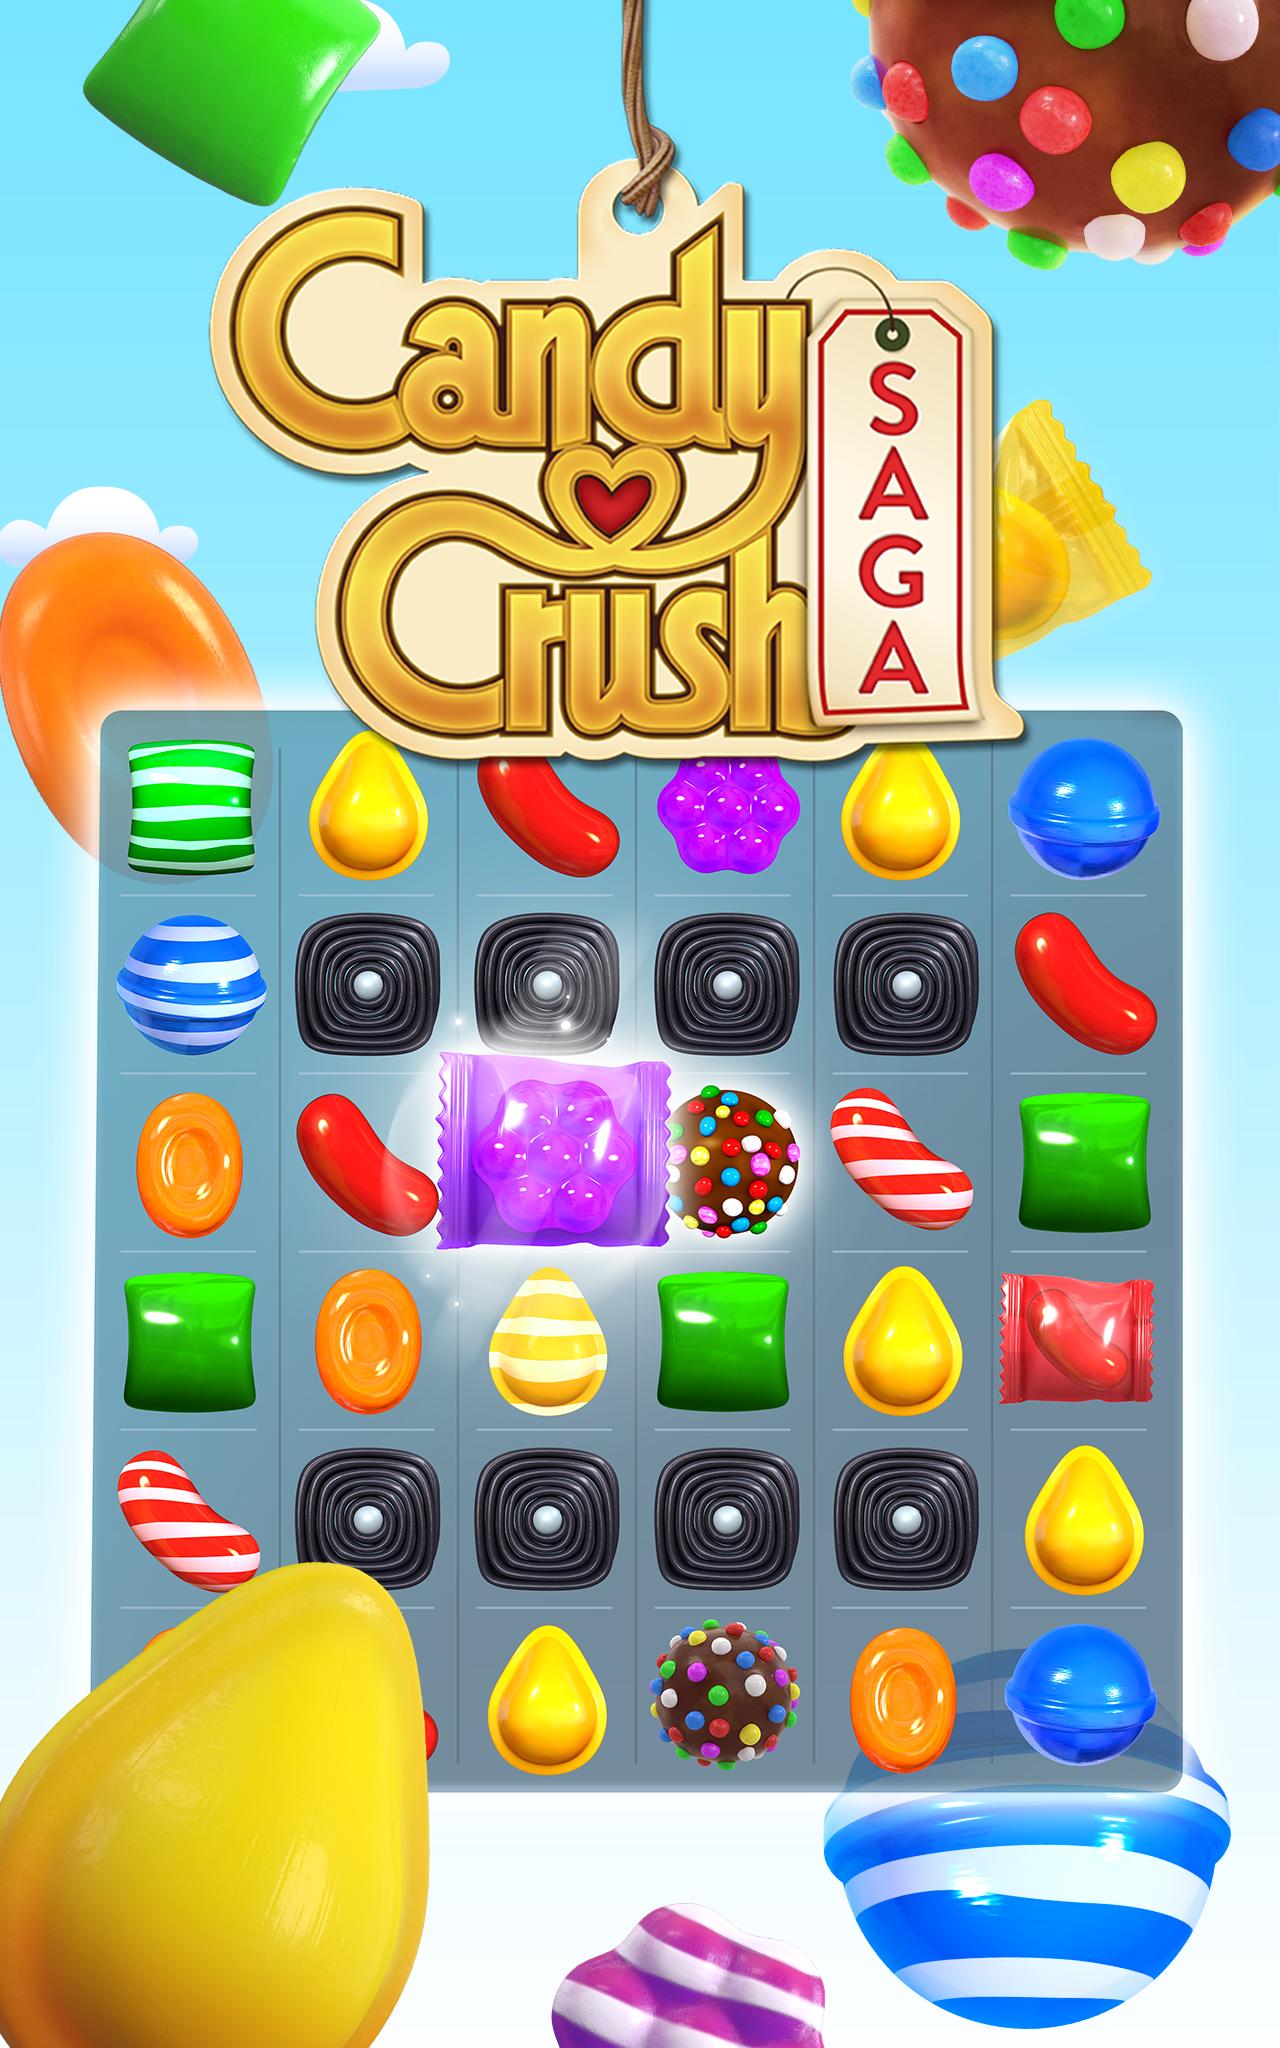 Candy crush saga king game free download for android phone